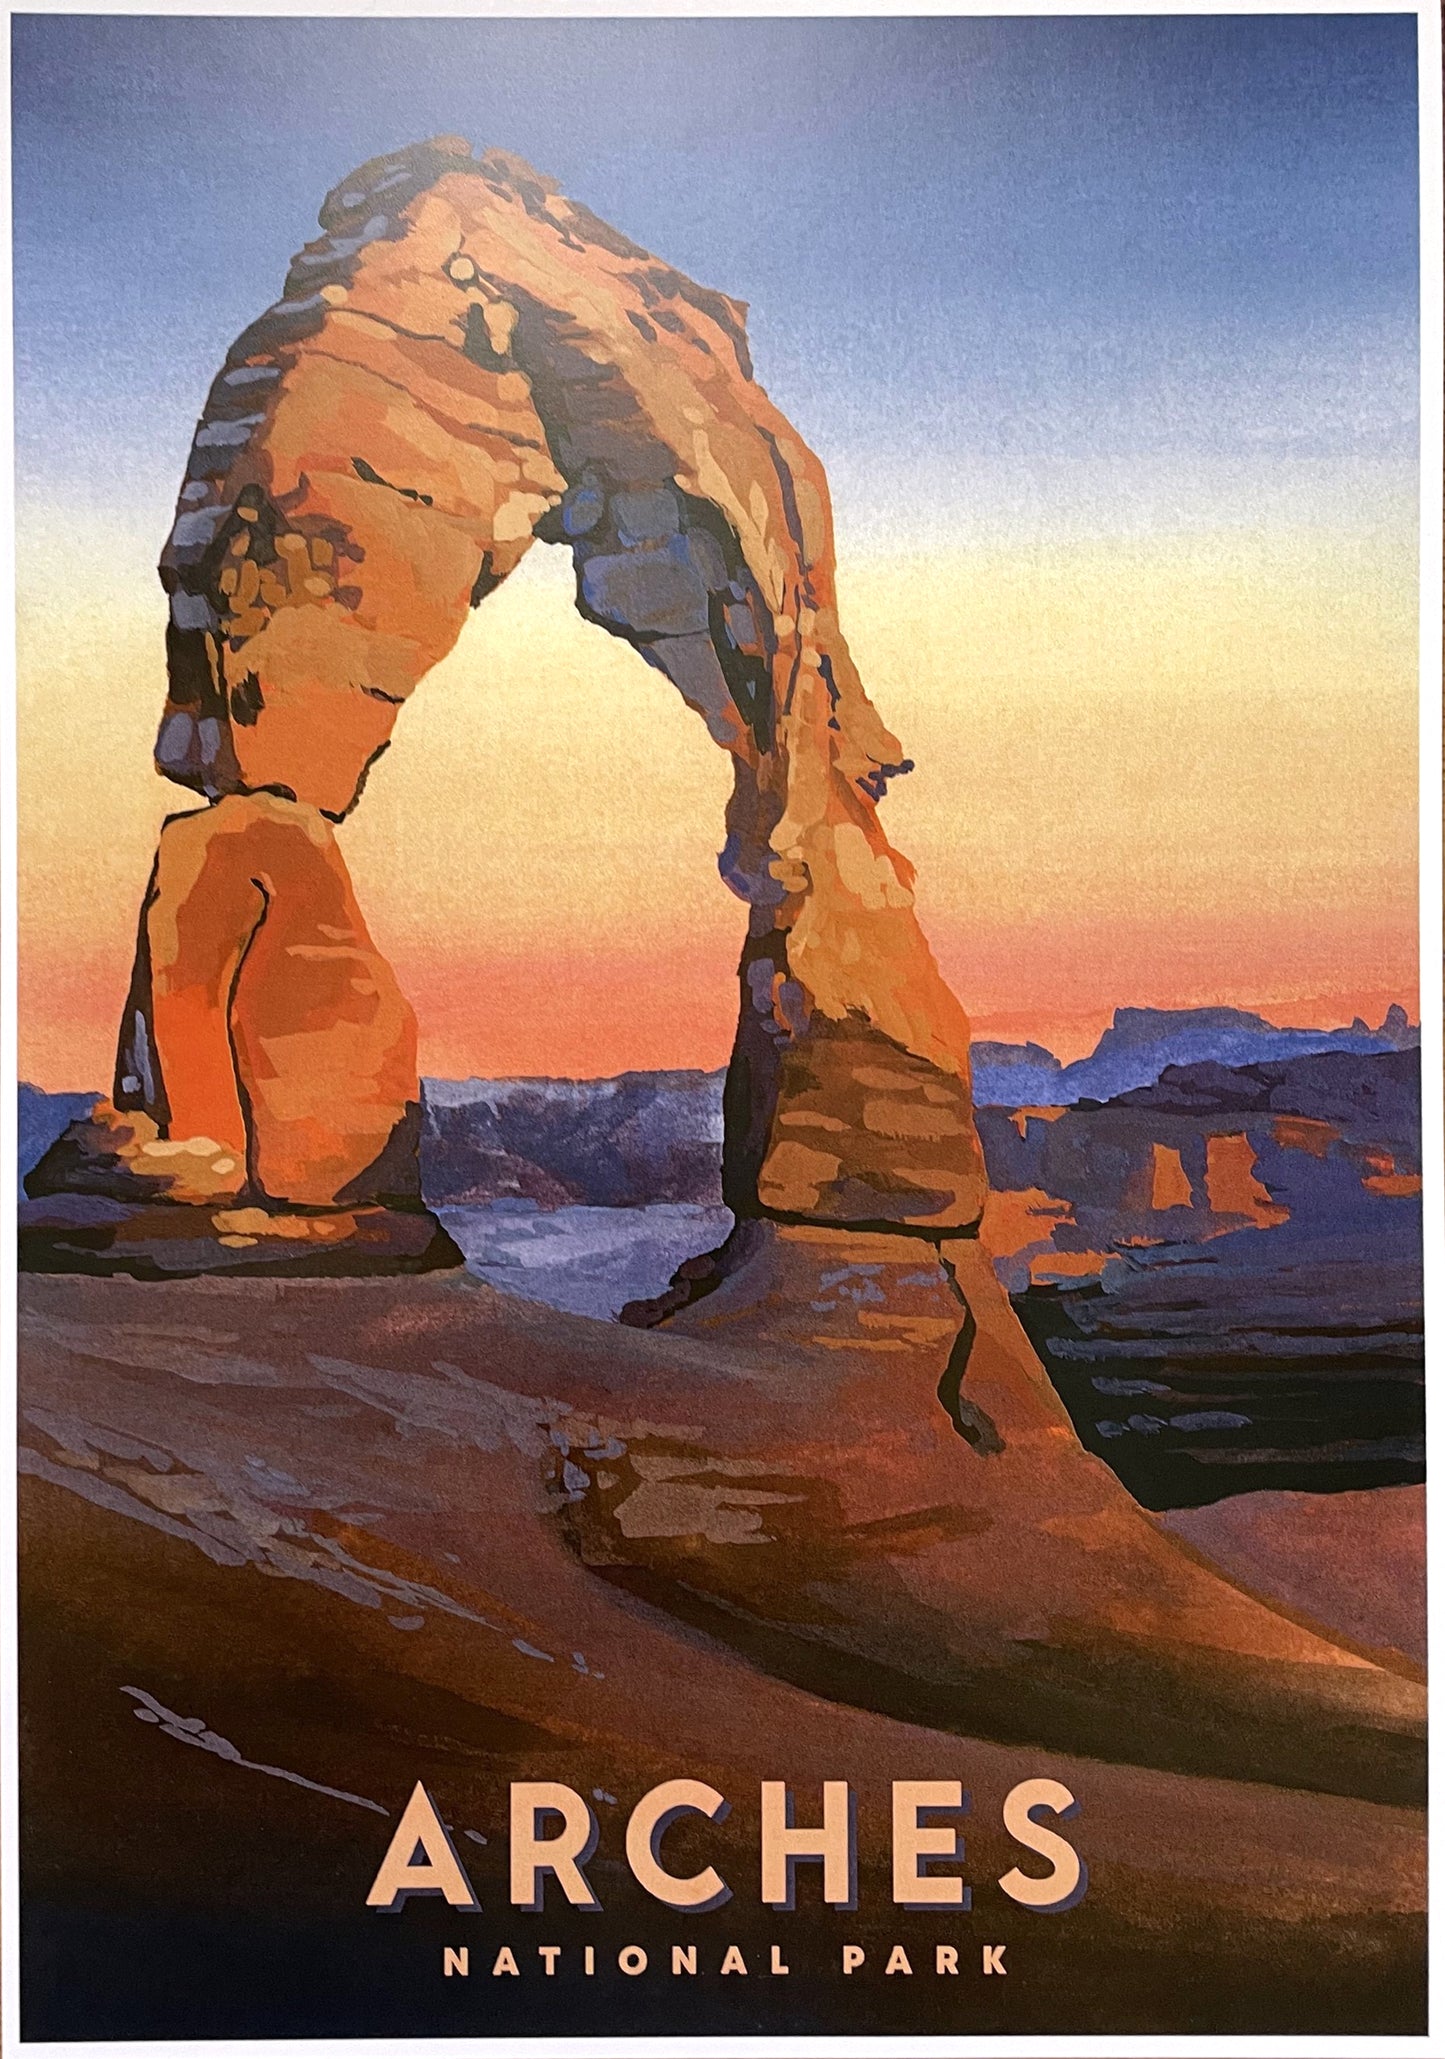 'Arches' National Park Travel Poster